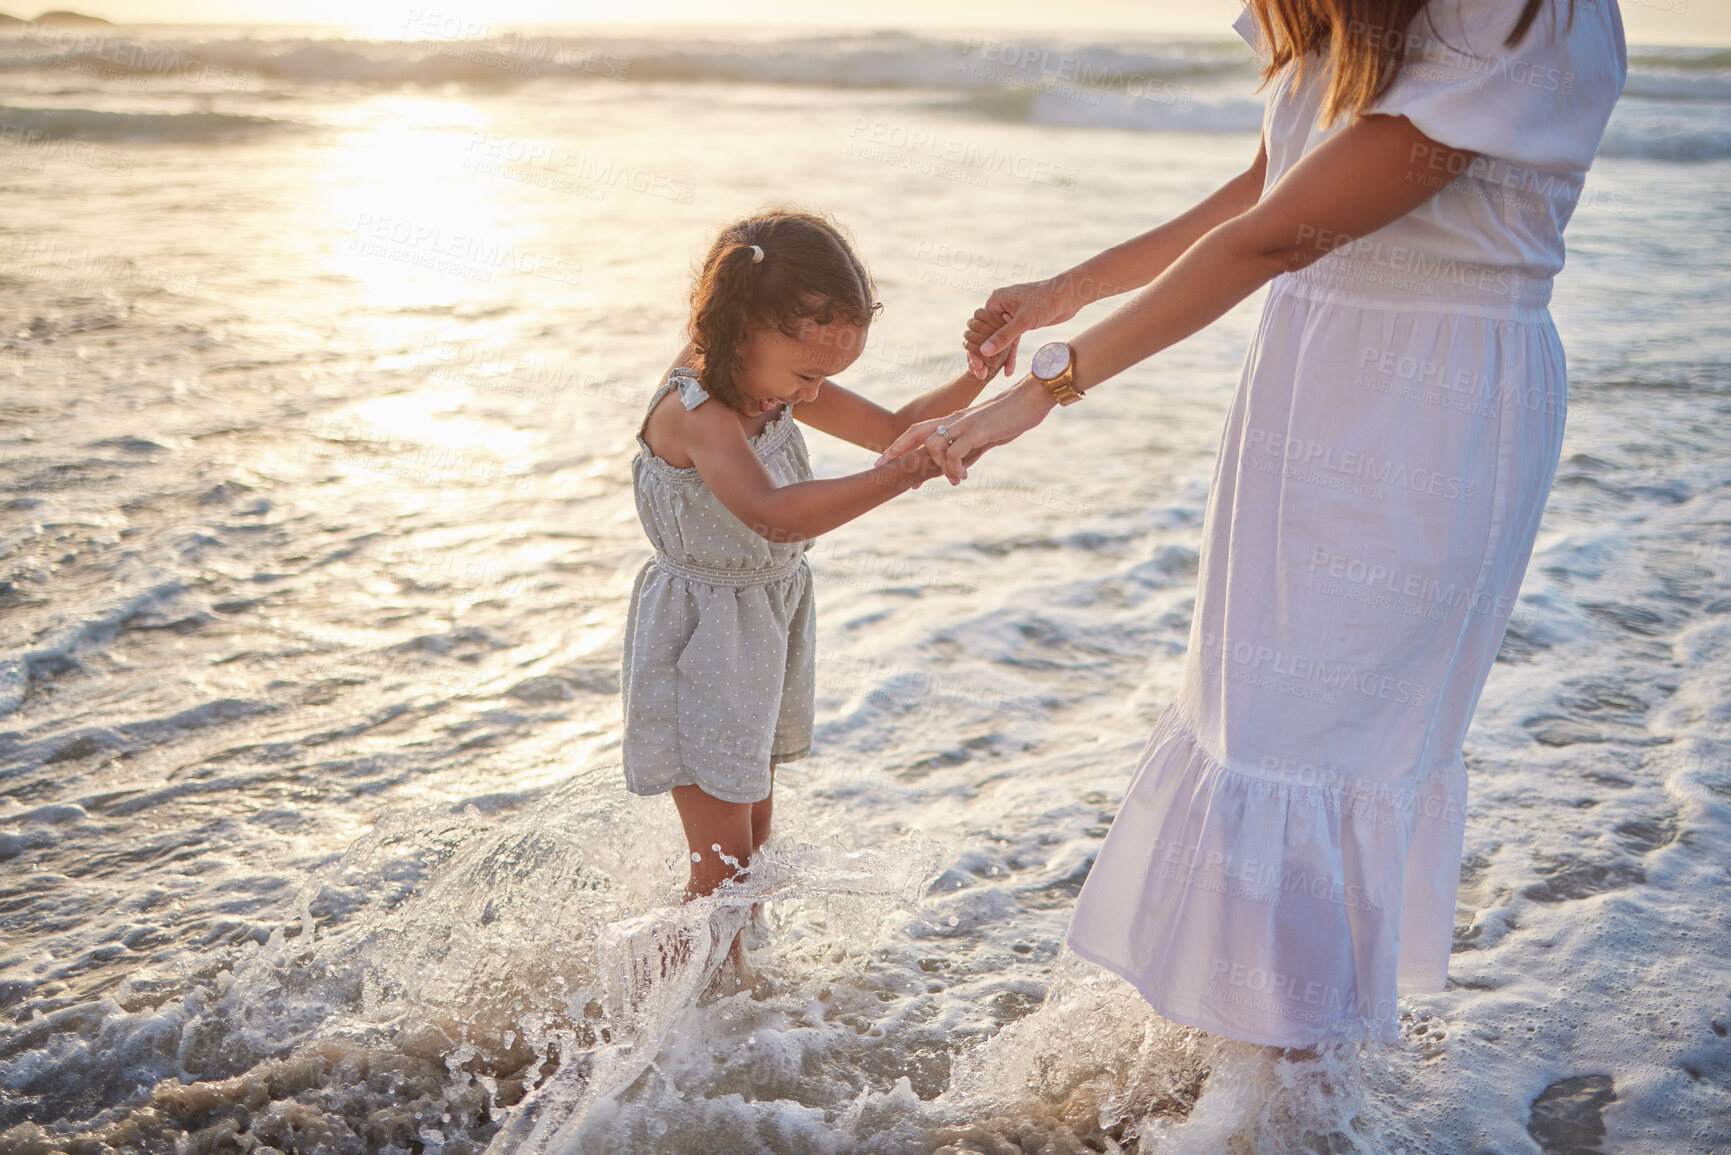 Buy stock photo Cute little girl and her mixed race mother playing in the water at the beach. Young daughter and her mom spending quality time together by the ocean during the summer. Happy and playful at sunset